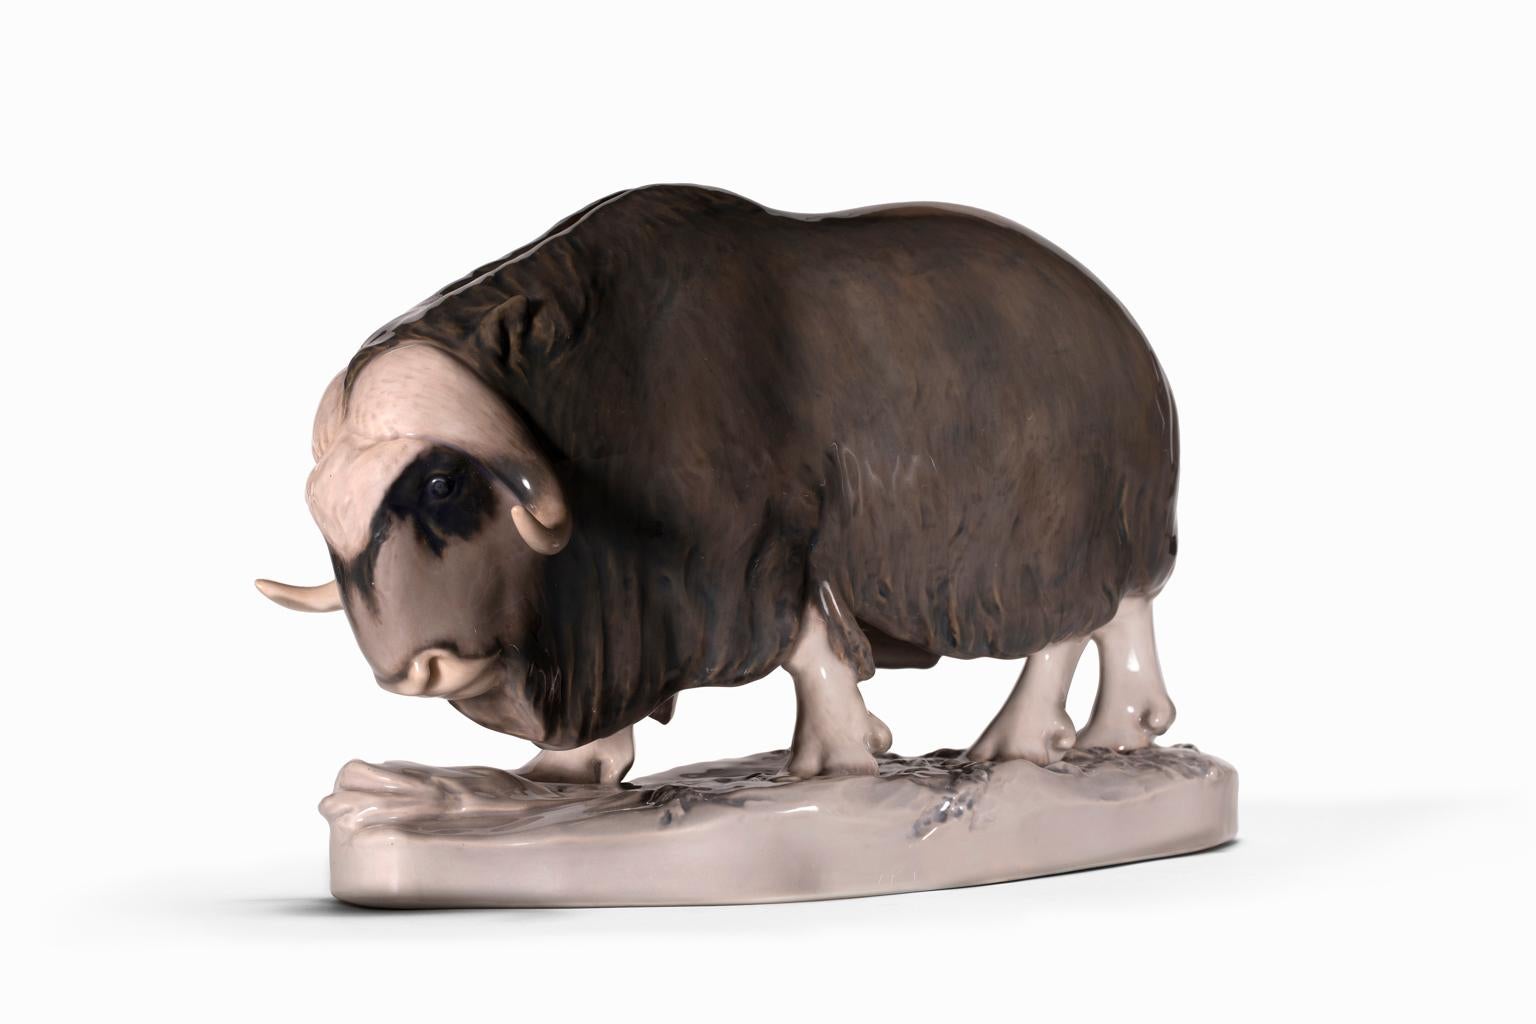 The beautiful and majestic Musk Ox is captured in all its strength and quiet beauty in #530 by Erik Nielsen in 1903 for Royal Copenhagen. The markings on verso indicated the piece was created prior to 1922. It is glazed in soft browns and mauve with